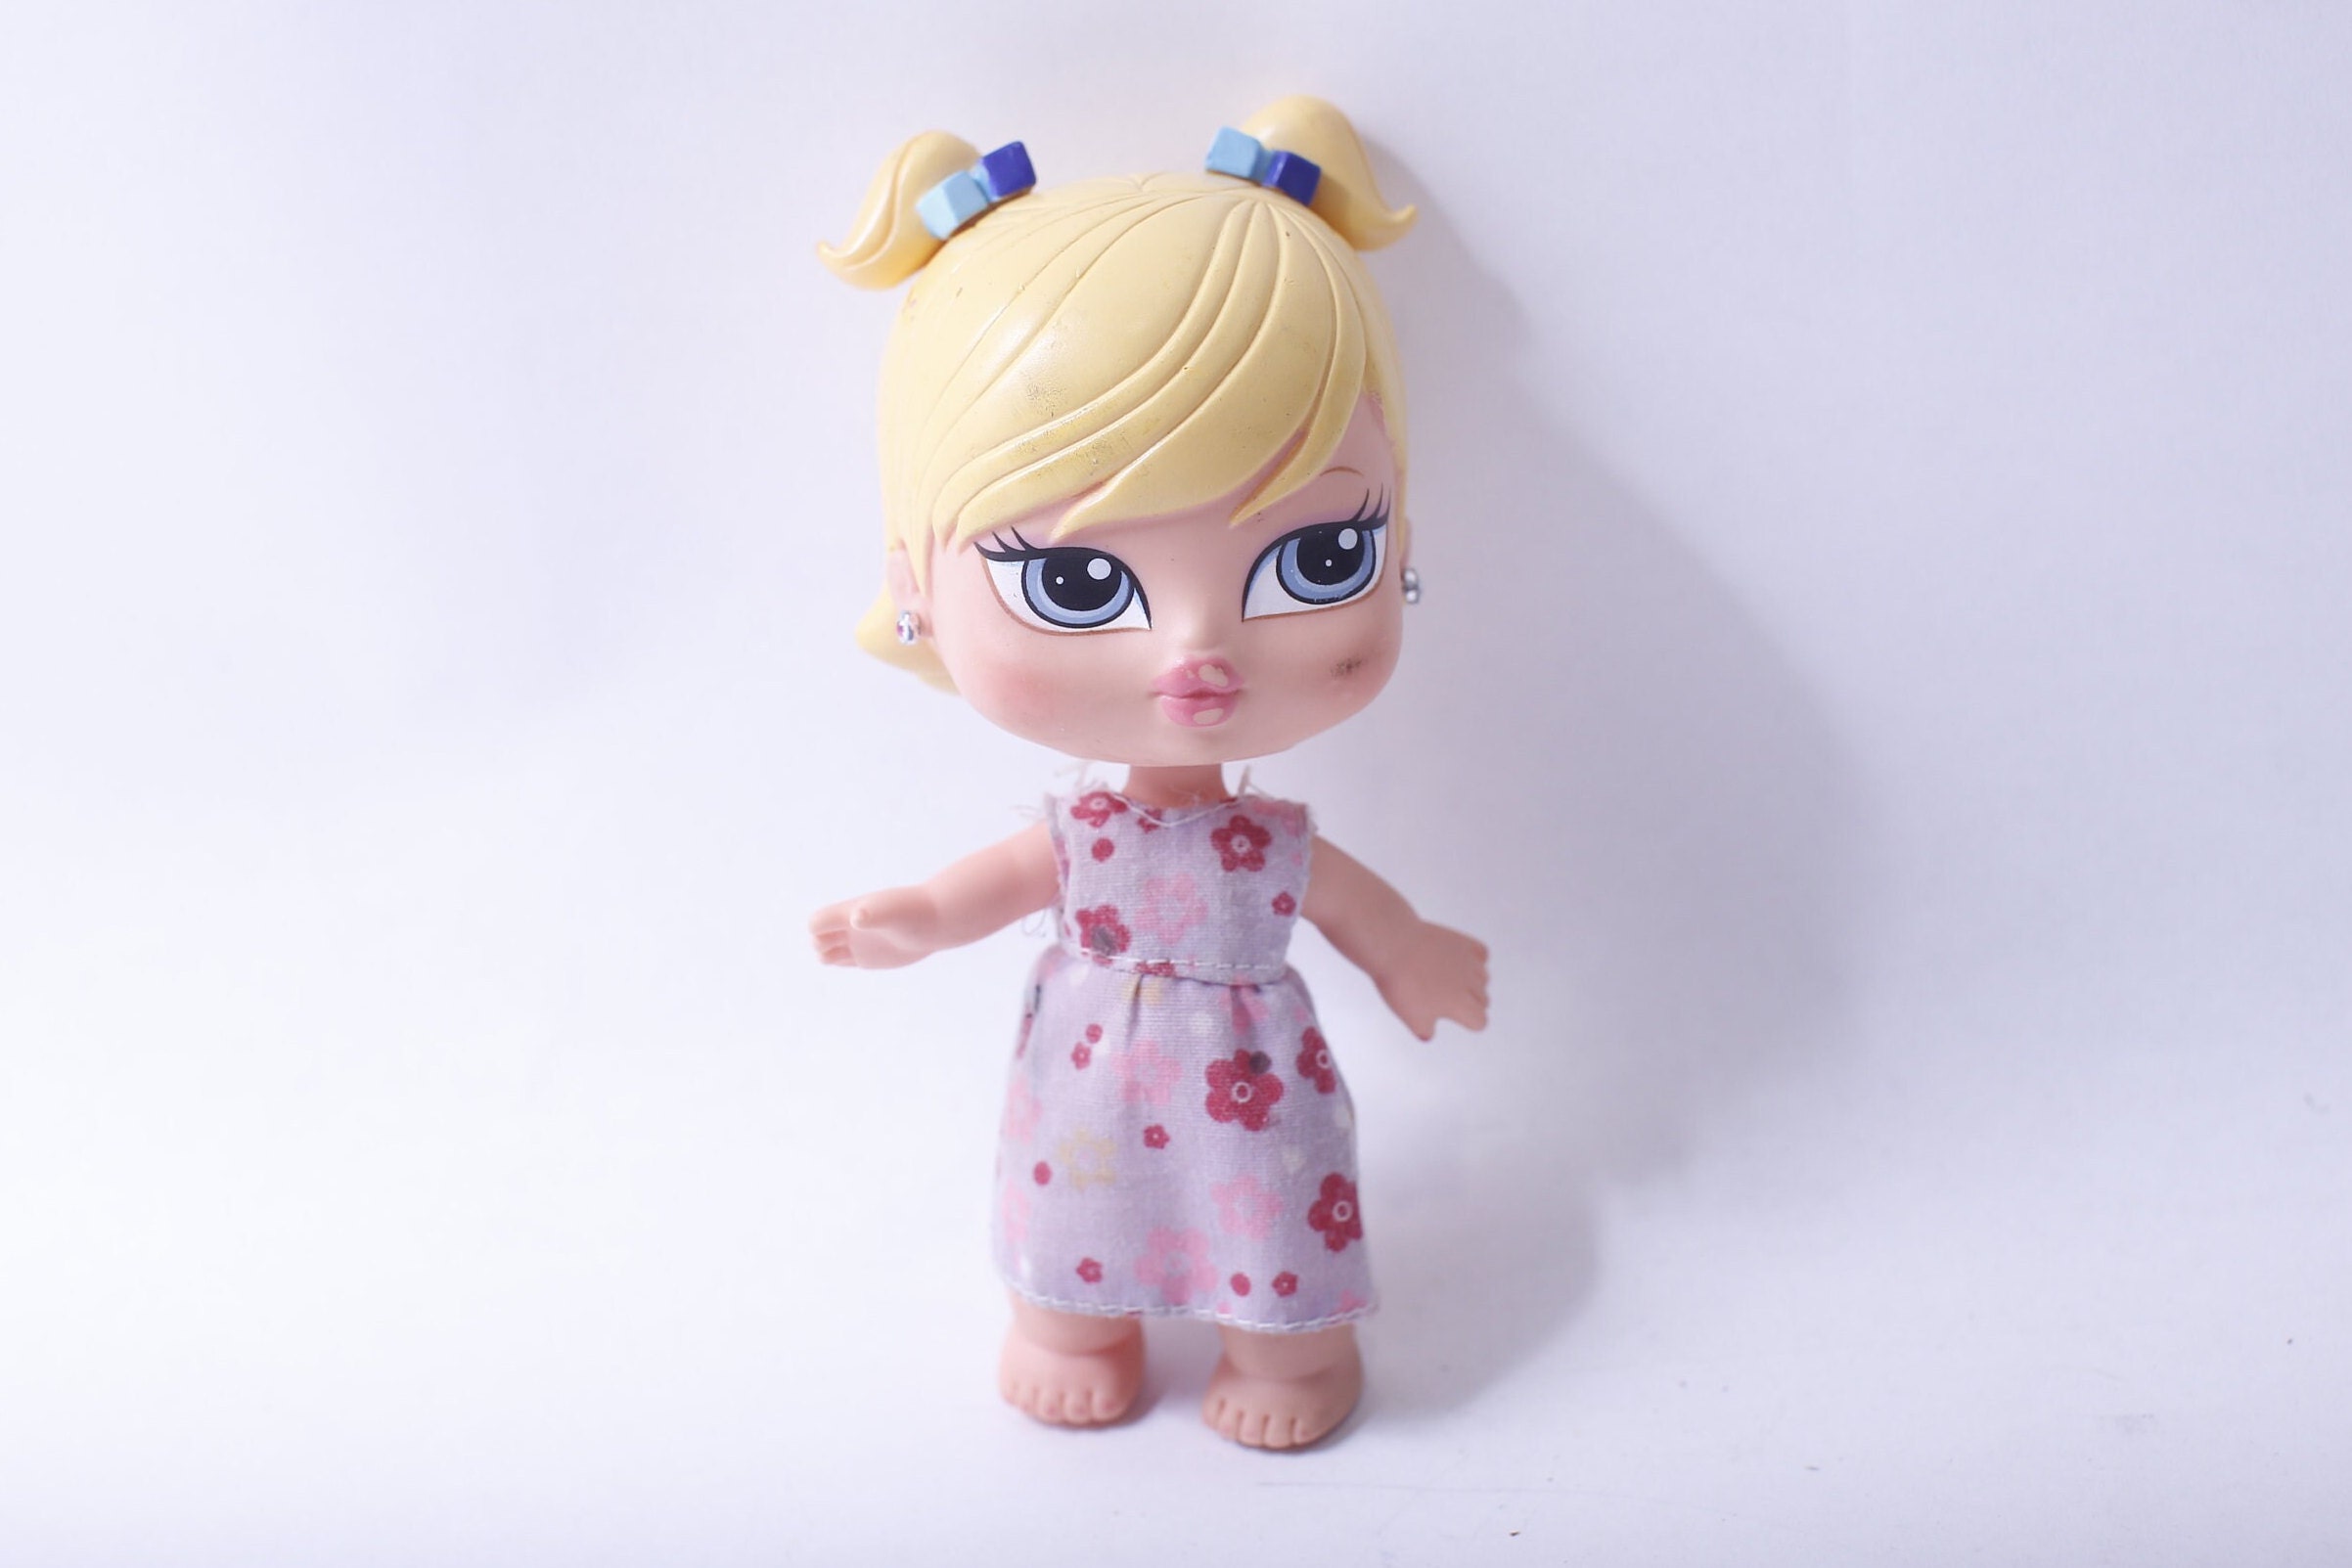 Vintage Large size Bratz baby doll that skates - toys & games - by